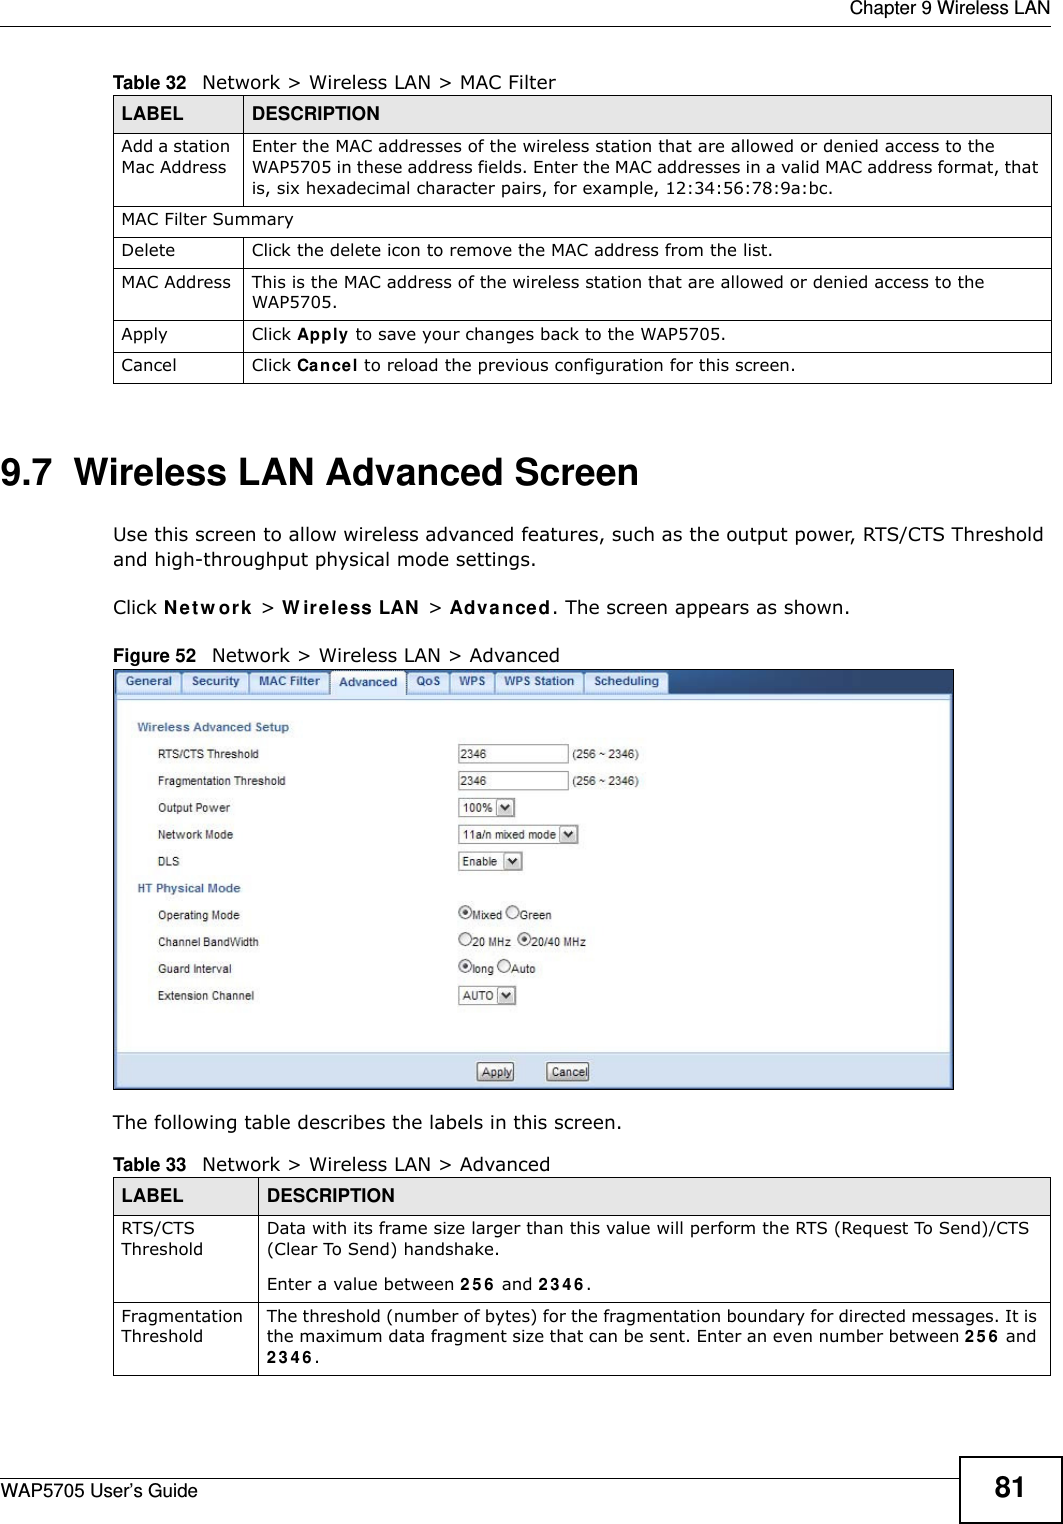  Chapter 9 Wireless LANWAP5705 User’s Guide 819.7  Wireless LAN Advanced Screen  Use this screen to allow wireless advanced features, such as the output power, RTS/CTS Threshold and high-throughput physical mode settings.Click N e t w o rk  &gt; W ir e le ss LAN &gt; Adva nced. The screen appears as shown.Figure 52   Network &gt; Wireless LAN &gt; AdvancedThe following table describes the labels in this screen. Add a station Mac AddressEnter the MAC addresses of the wireless station that are allowed or denied access to the WAP5705 in these address fields. Enter the MAC addresses in a valid MAC address format, that is, six hexadecimal character pairs, for example, 12:34:56:78:9a:bc. MAC Filter SummaryDelete Click the delete icon to remove the MAC address from the list.MAC Address This is the MAC address of the wireless station that are allowed or denied access to the WAP5705.Apply Click Apply to save your changes back to the WAP5705.Cancel Click Cancel to reload the previous configuration for this screen.Table 32   Network &gt; Wireless LAN &gt; MAC FilterLABEL DESCRIPTIONTable 33   Network &gt; Wireless LAN &gt; AdvancedLABEL DESCRIPTIONRTS/CTS ThresholdData with its frame size larger than this value will perform the RTS (Request To Send)/CTS (Clear To Send) handshake. Enter a value between 2 5 6  and 2 3 4 6 . Fragmentation ThresholdThe threshold (number of bytes) for the fragmentation boundary for directed messages. It is the maximum data fragment size that can be sent. Enter an even number between 2 5 6  and 2 3 4 6 .